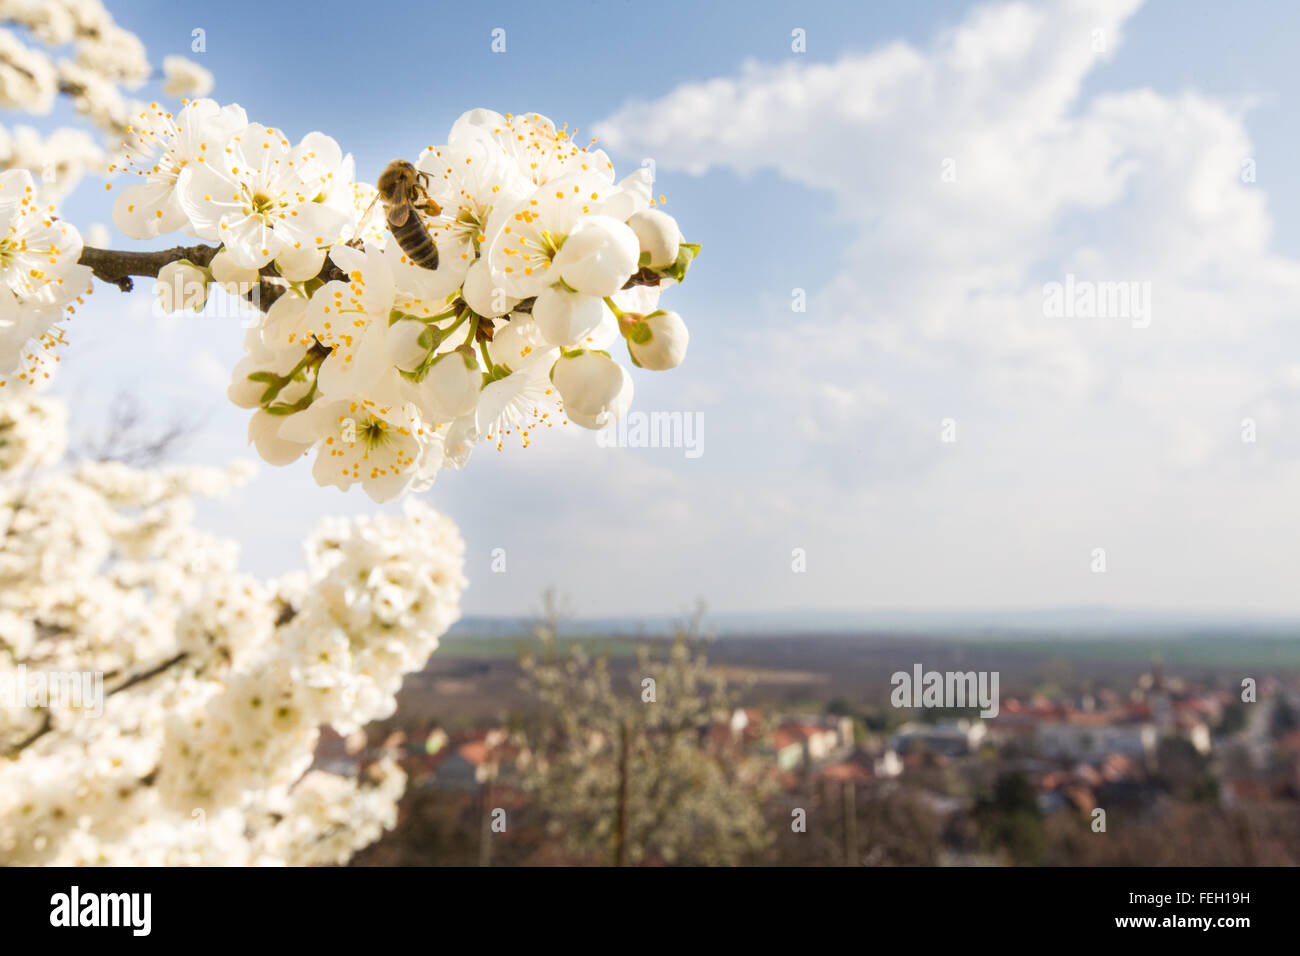 Flowering tree with bee and european city behind, copy space Stock Photo